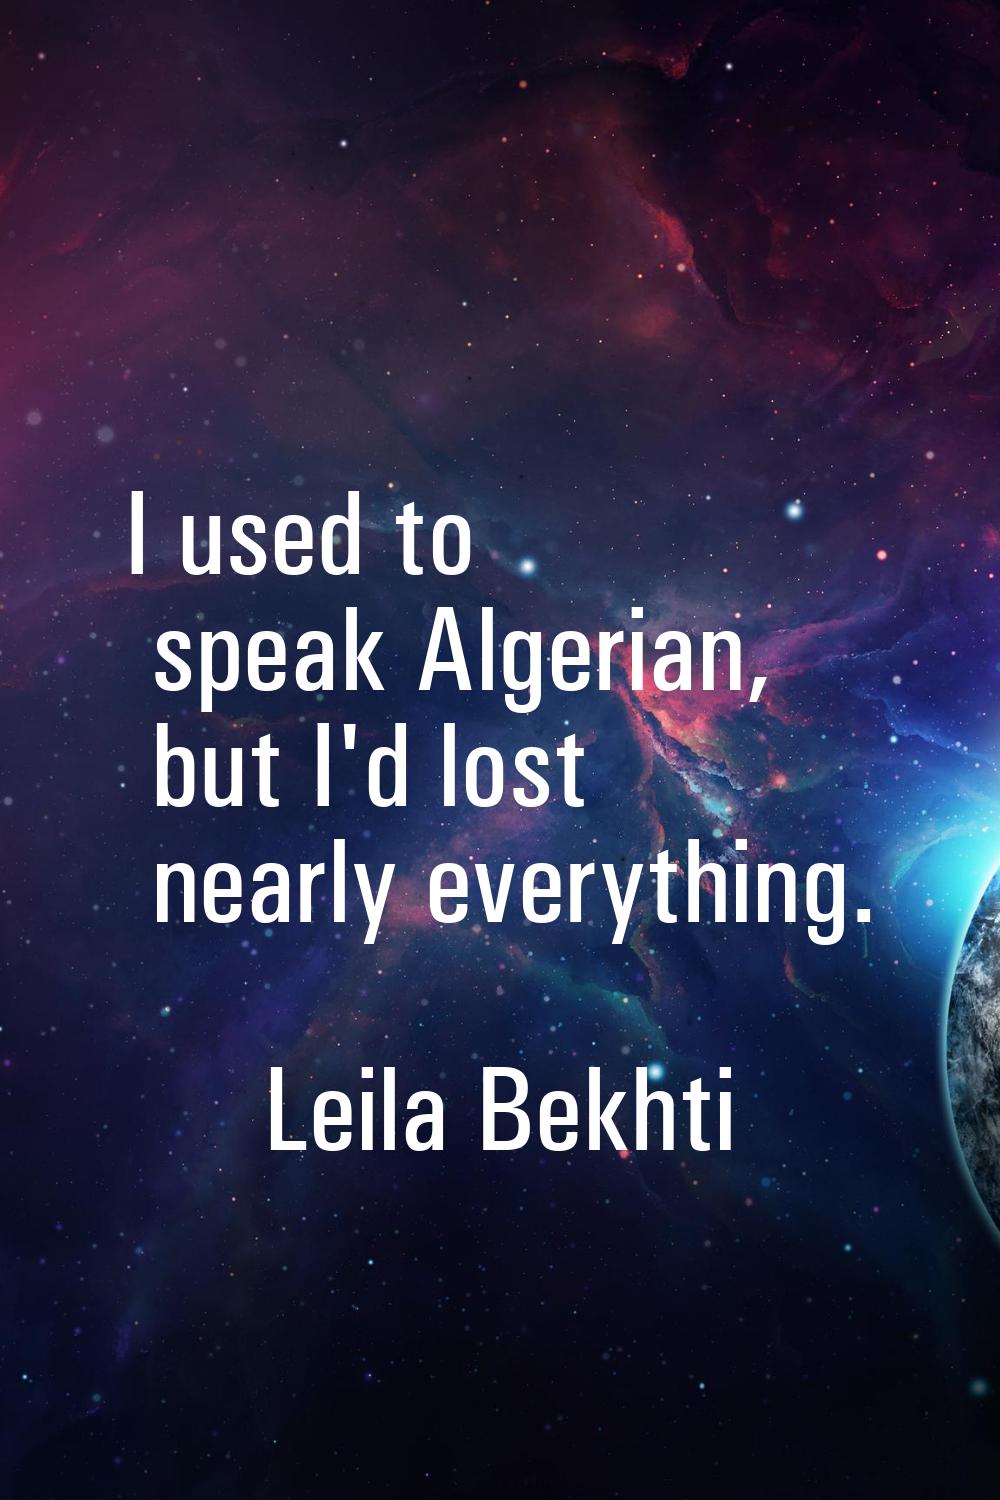 I used to speak Algerian, but I'd lost nearly everything.